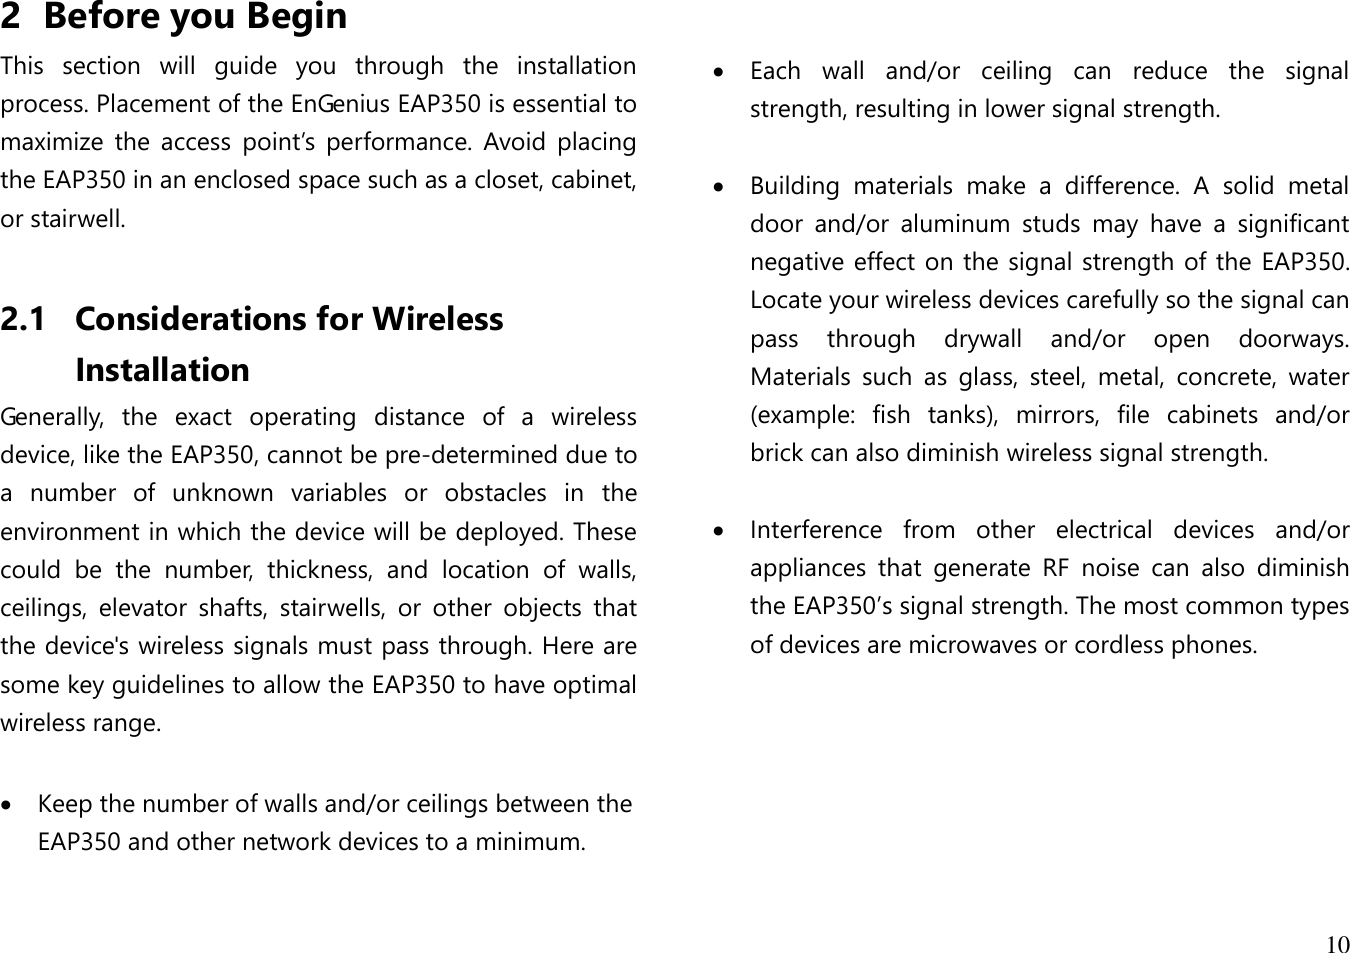  10  2 Before you Begin This  section  will  guide  you  through  the  installation process. Placement of the EnGenius EAP350 is essential to maximize  the  access  point’s  performance.  Avoid  placing the EAP350 in an enclosed space such as a closet, cabinet, or stairwell.  2.1 Considerations for Wireless Installation Generally,  the  exact  operating  distance  of  a  wireless device, like the EAP350, cannot be pre-determined due to a  number  of  unknown  variables  or  obstacles  in  the environment in which the device will be deployed. These could  be  the  number,  thickness,  and  location  of  walls, ceilings,  elevator  shafts,  stairwells,  or  other  objects  that the device&apos;s wireless signals must pass through. Here are some key guidelines to allow the EAP350 to have optimal wireless range.   Keep the number of walls and/or ceilings between the EAP350 and other network devices to a minimum.       Each  wall  and/or  ceiling  can  reduce  the  signal strength, resulting in lower signal strength.   Building  materials  make  a  difference.  A  solid  metal door  and/or  aluminum  studs  may  have  a  significant negative effect on the signal strength of the EAP350. Locate your wireless devices carefully so the signal can pass  through  drywall  and/or  open  doorways. Materials  such  as  glass,  steel,  metal,  concrete,  water (example:  fish  tanks),  mirrors,  file  cabinets  and/or brick can also diminish wireless signal strength.   Interference  from  other  electrical  devices  and/or appliances  that  generate  RF  noise  can  also  diminish the EAP350’s signal strength. The most common types of devices are microwaves or cordless phones.  